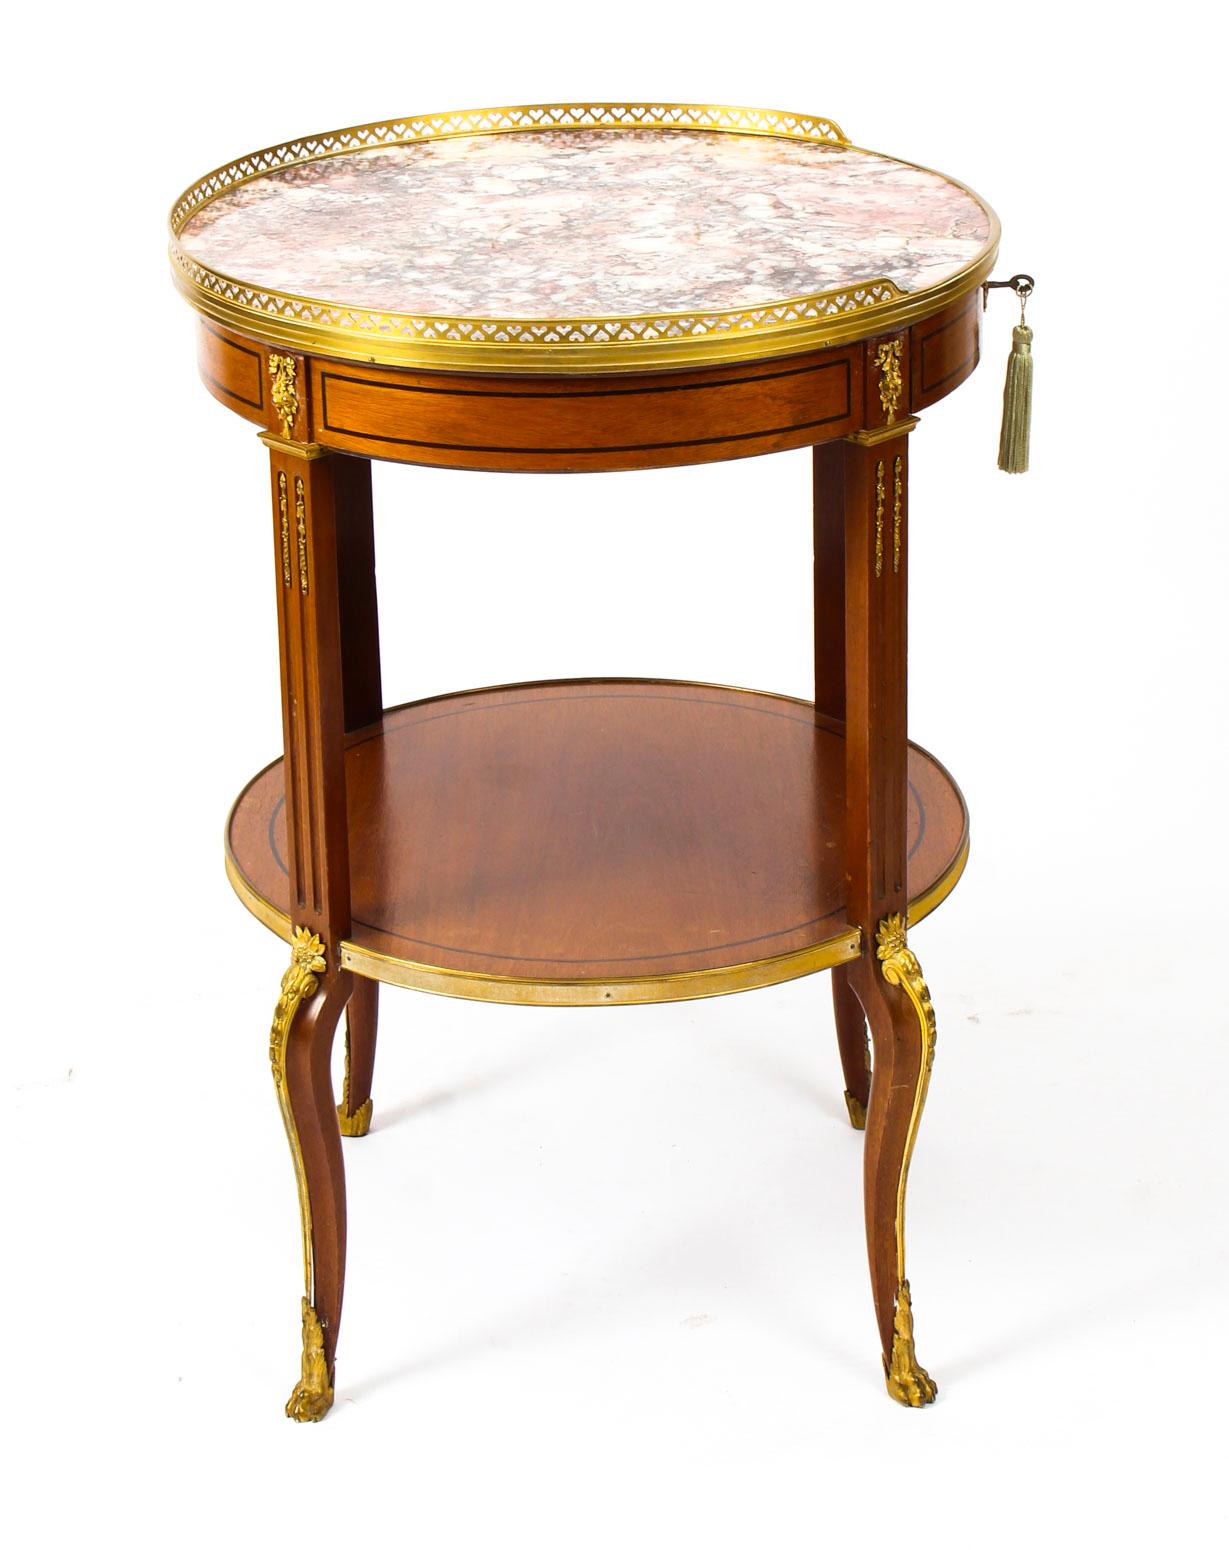 Antique French Louis Revival Marble and Ormolu Occasional Table, 19th Century For Sale 7